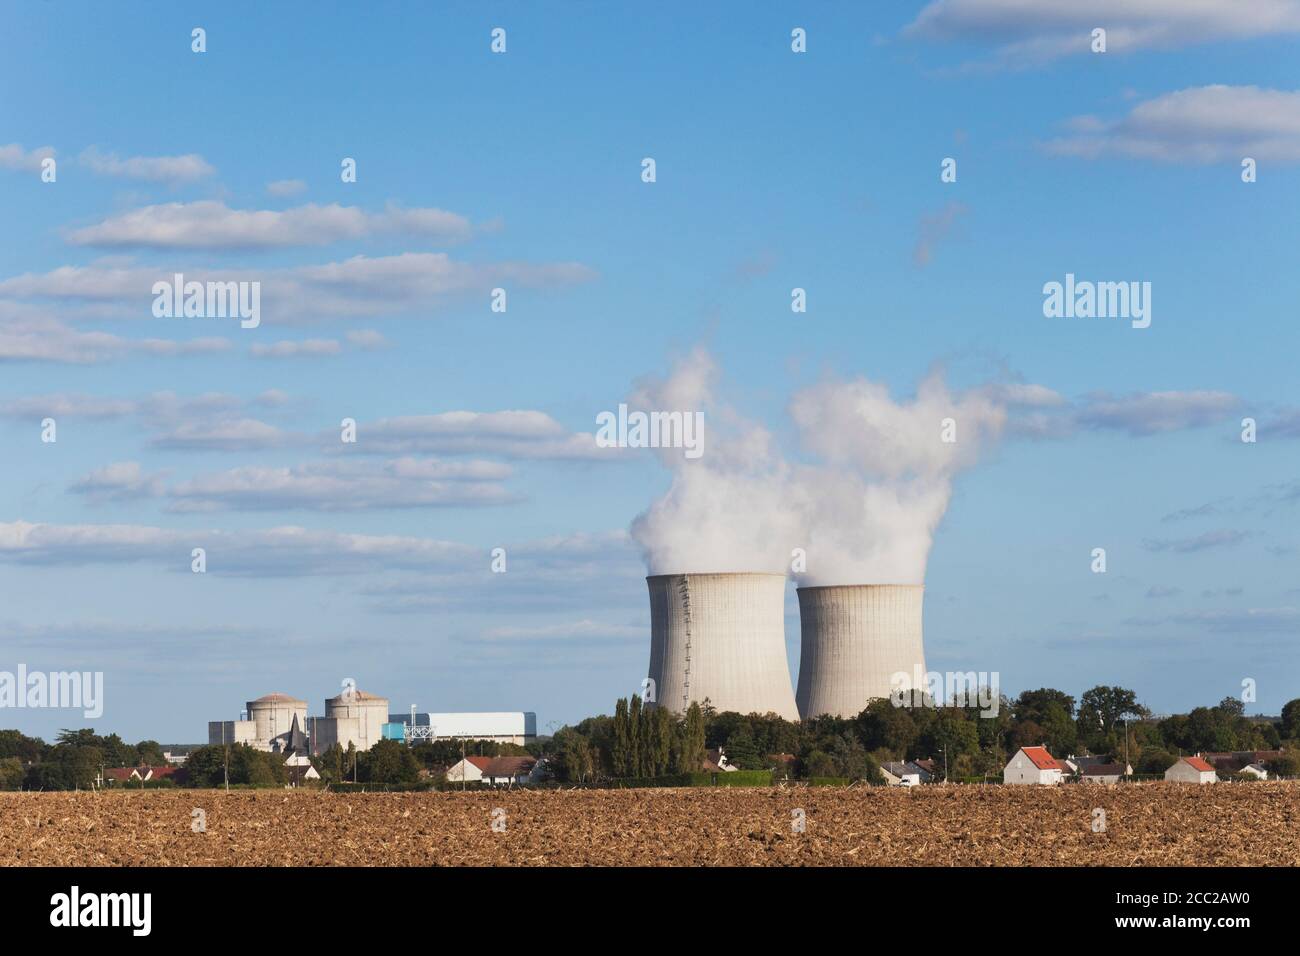 France, View of Nuclear Power Plant Stock Photo